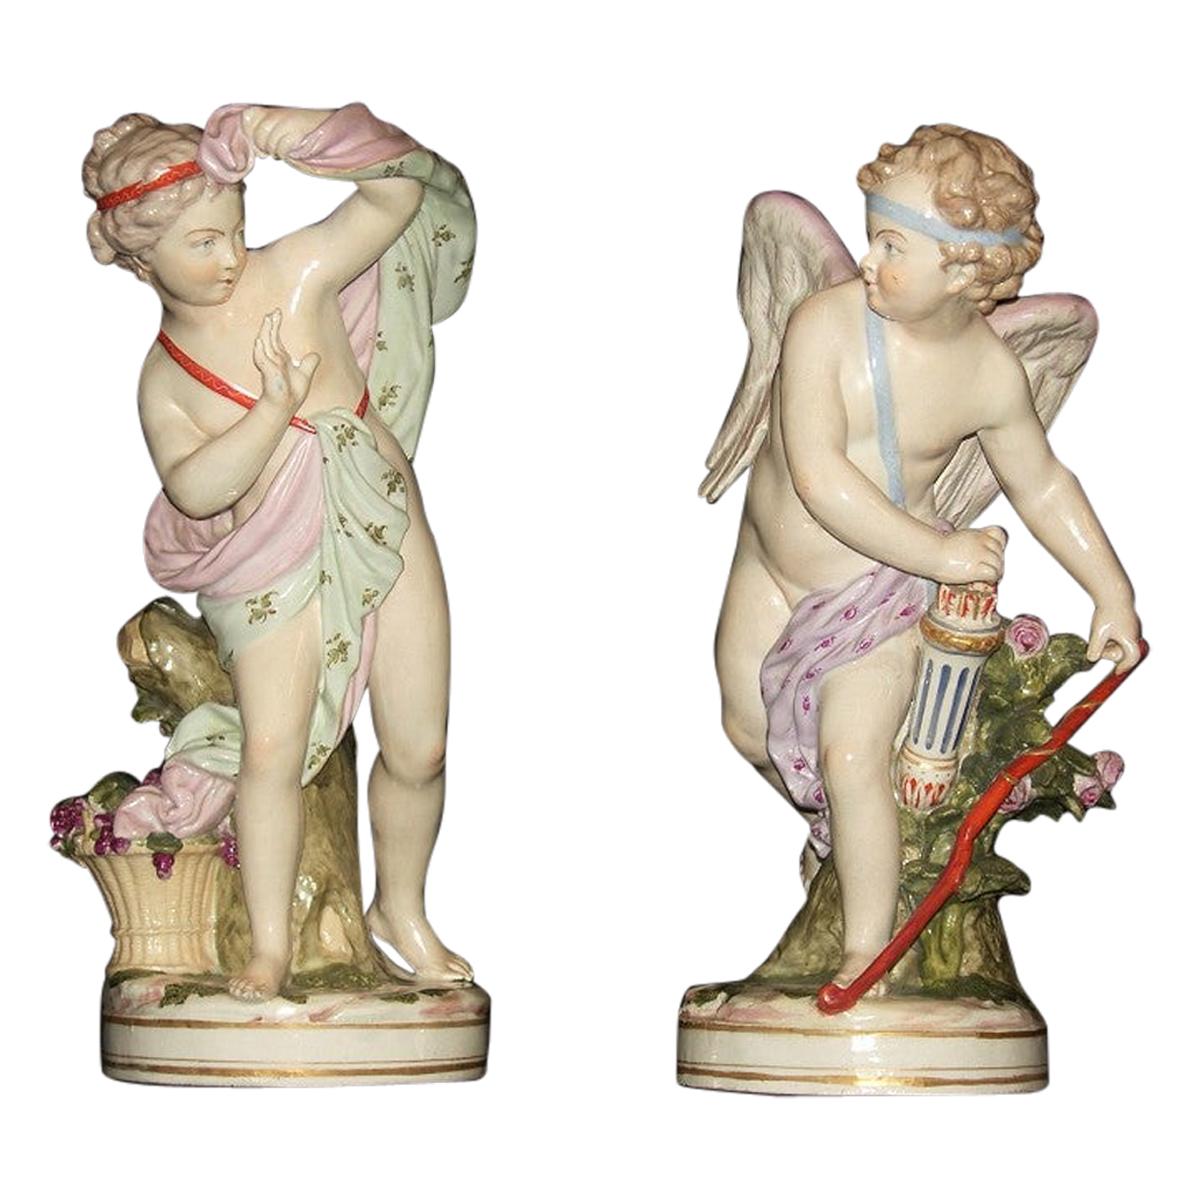 19th Century, Pair of French Porcelain Sculptures Depicting Cupid and Psyche